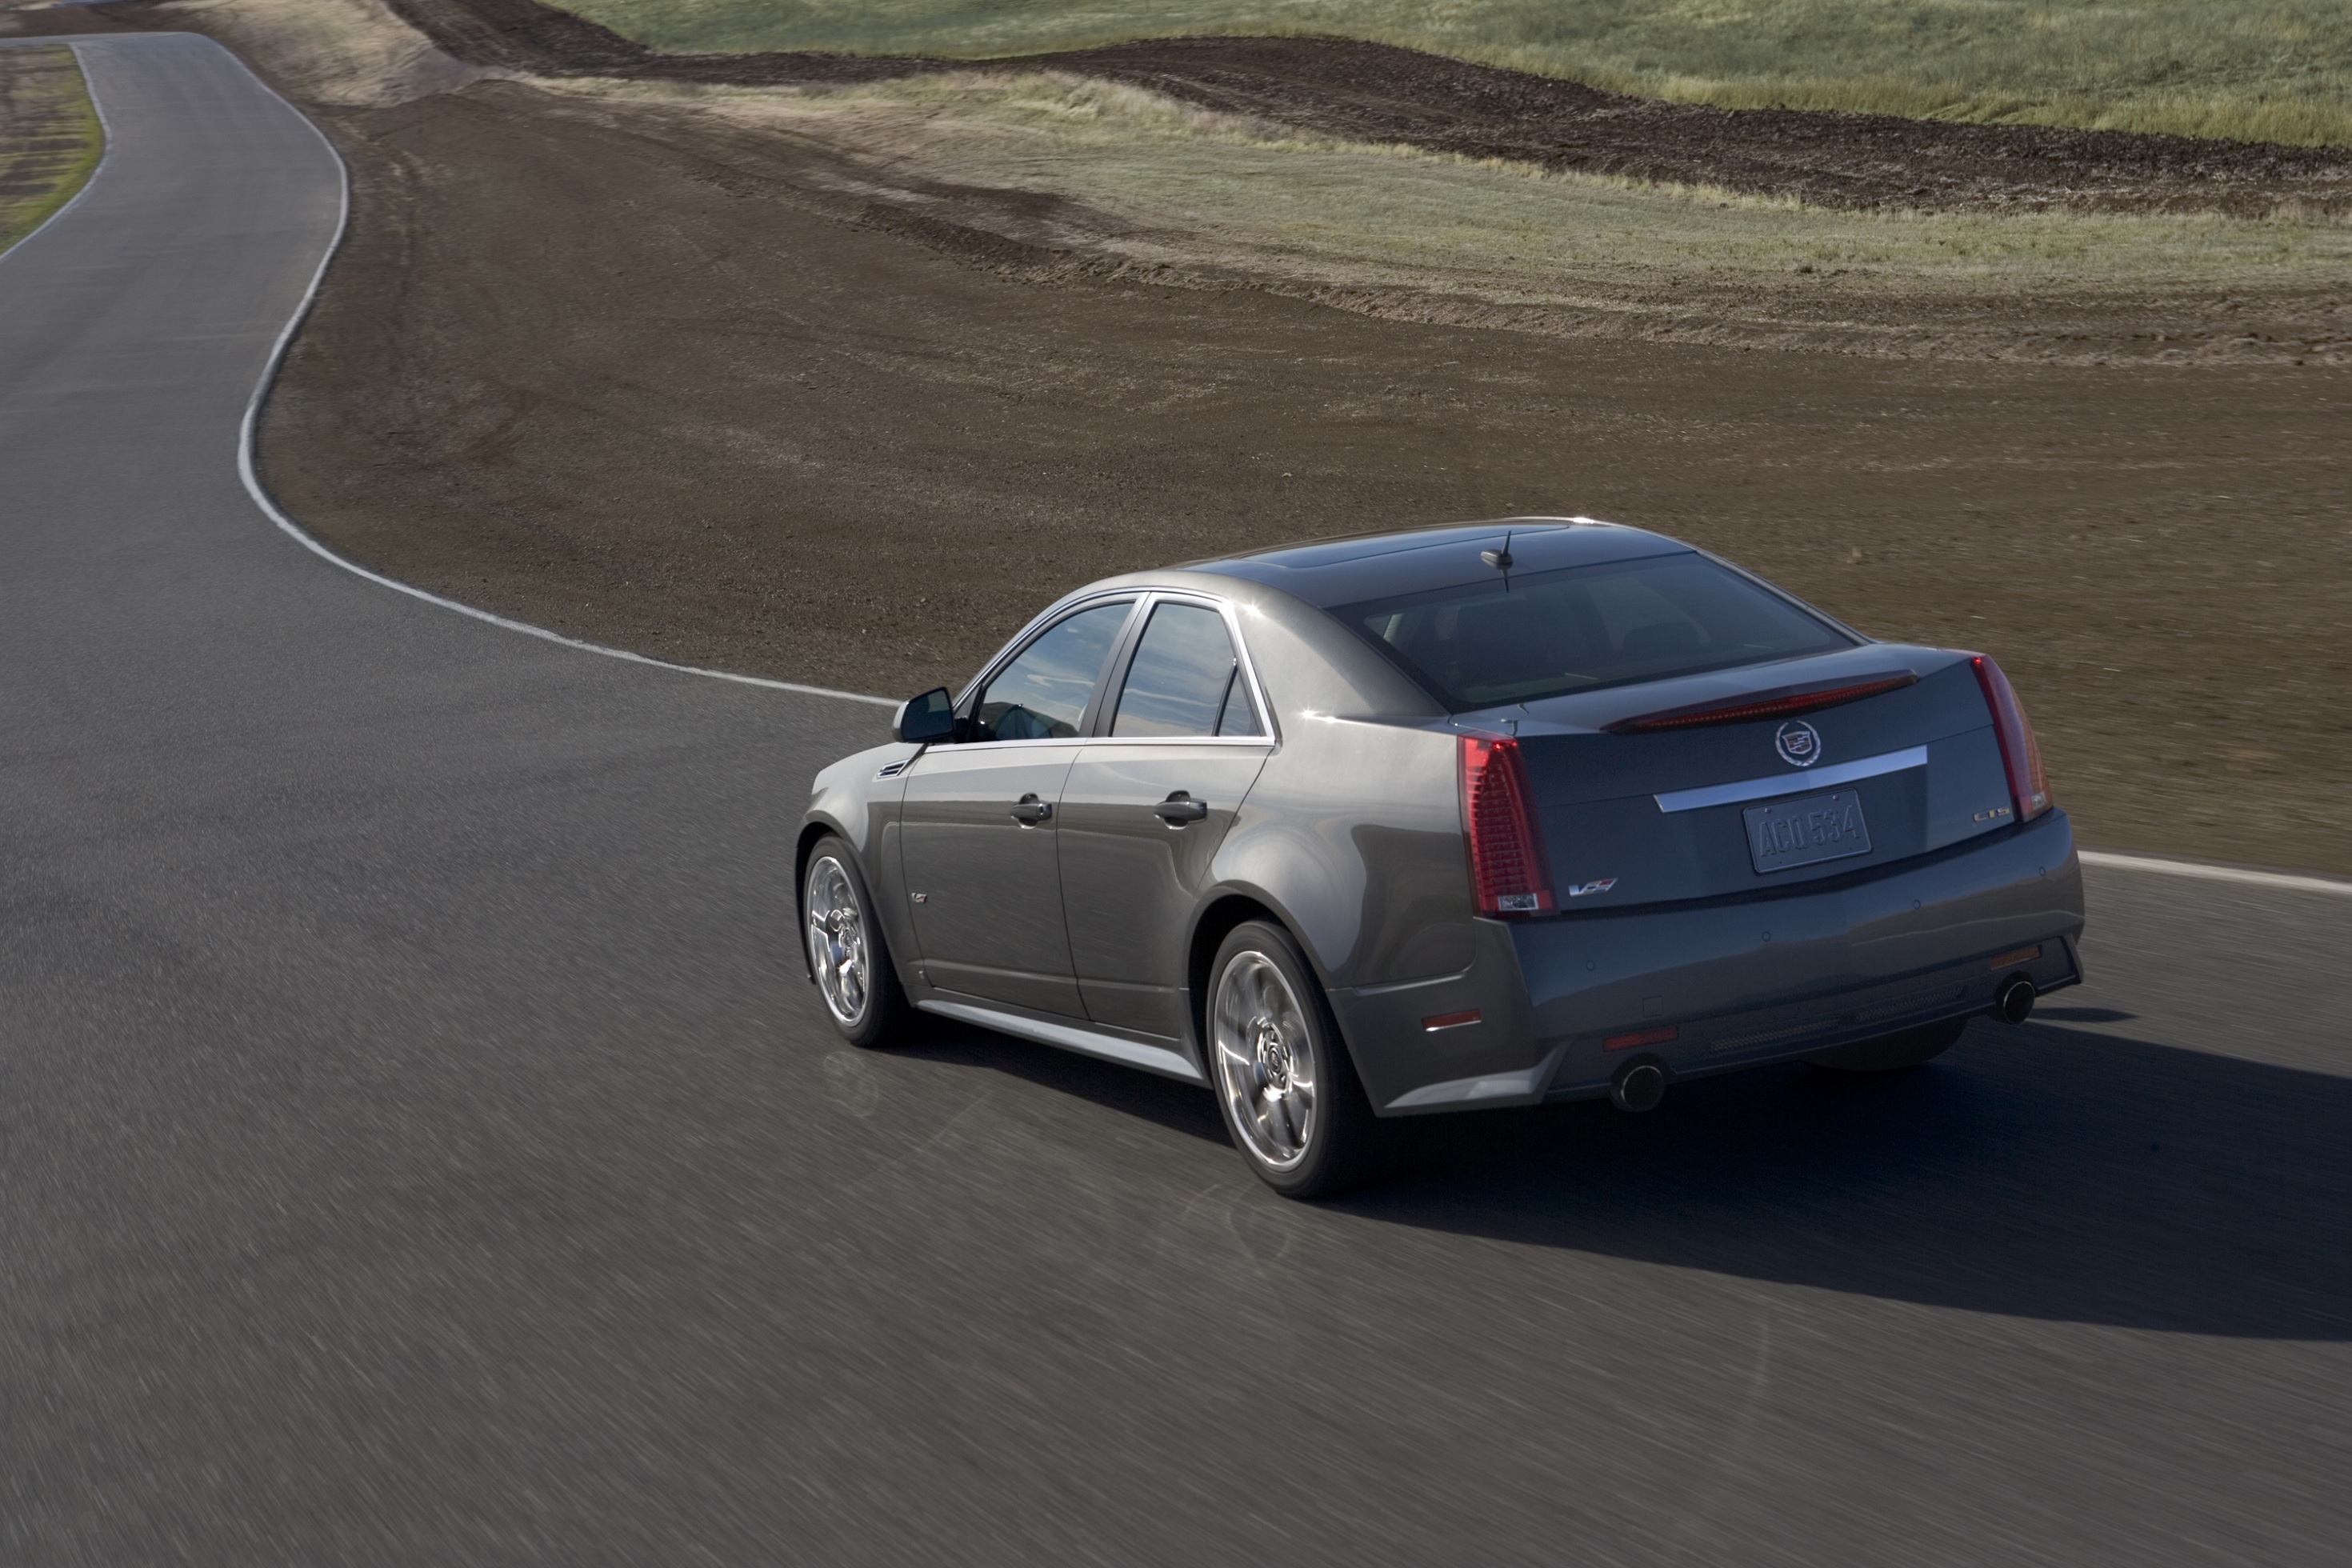 The rear 3/4 view of a gray 2011 Cadillac CTS-V Sedan driving around a track